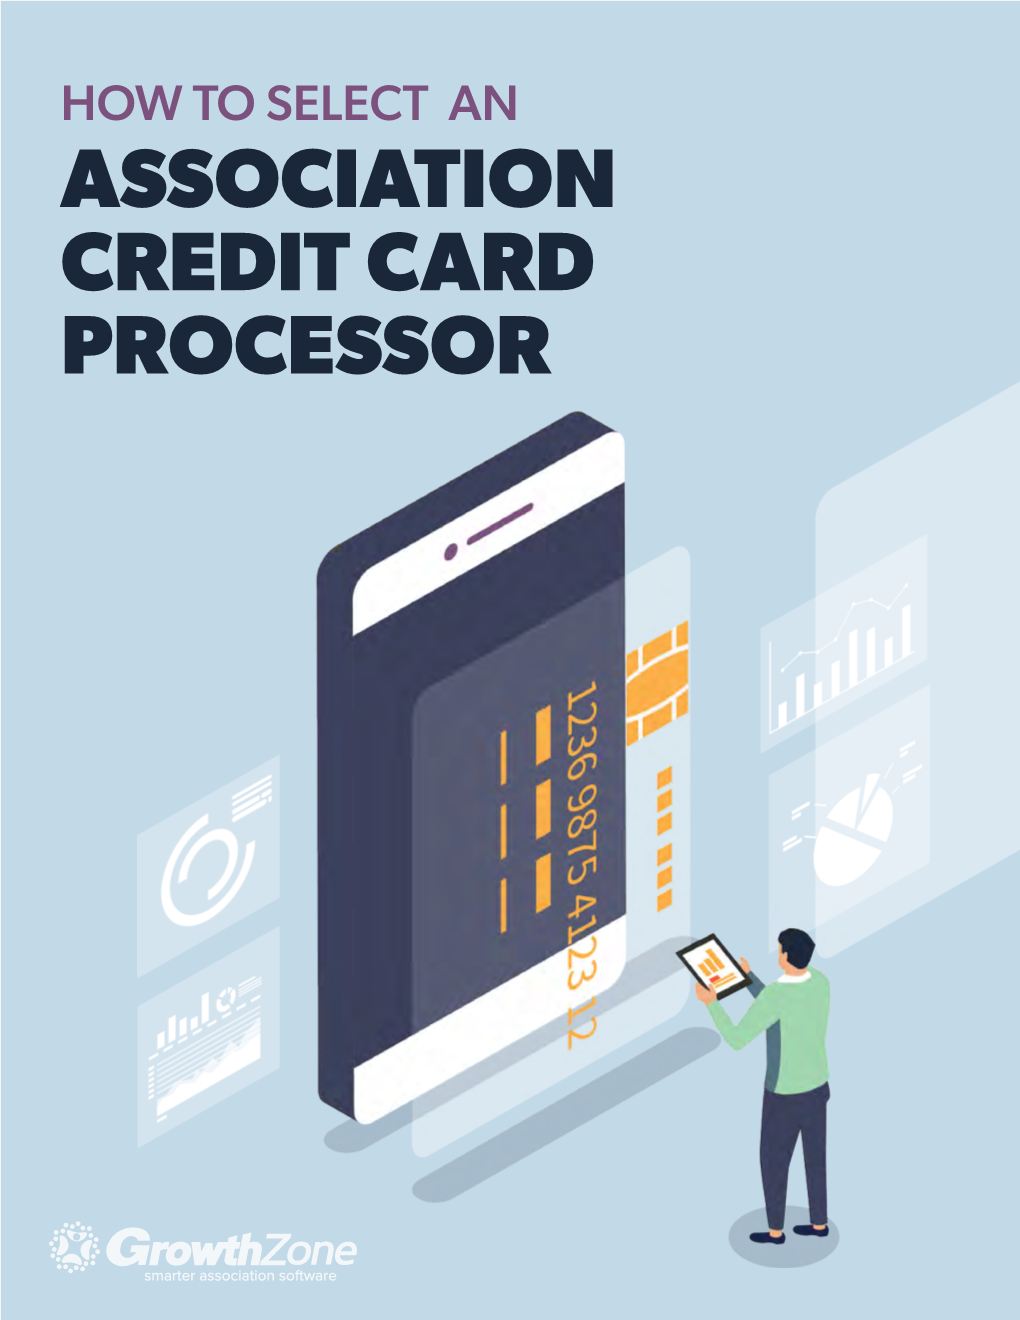 How to Select an Association Credit Card Processor How to Select an Association Credit Card Processor How to Select an Association Credit Card Processor